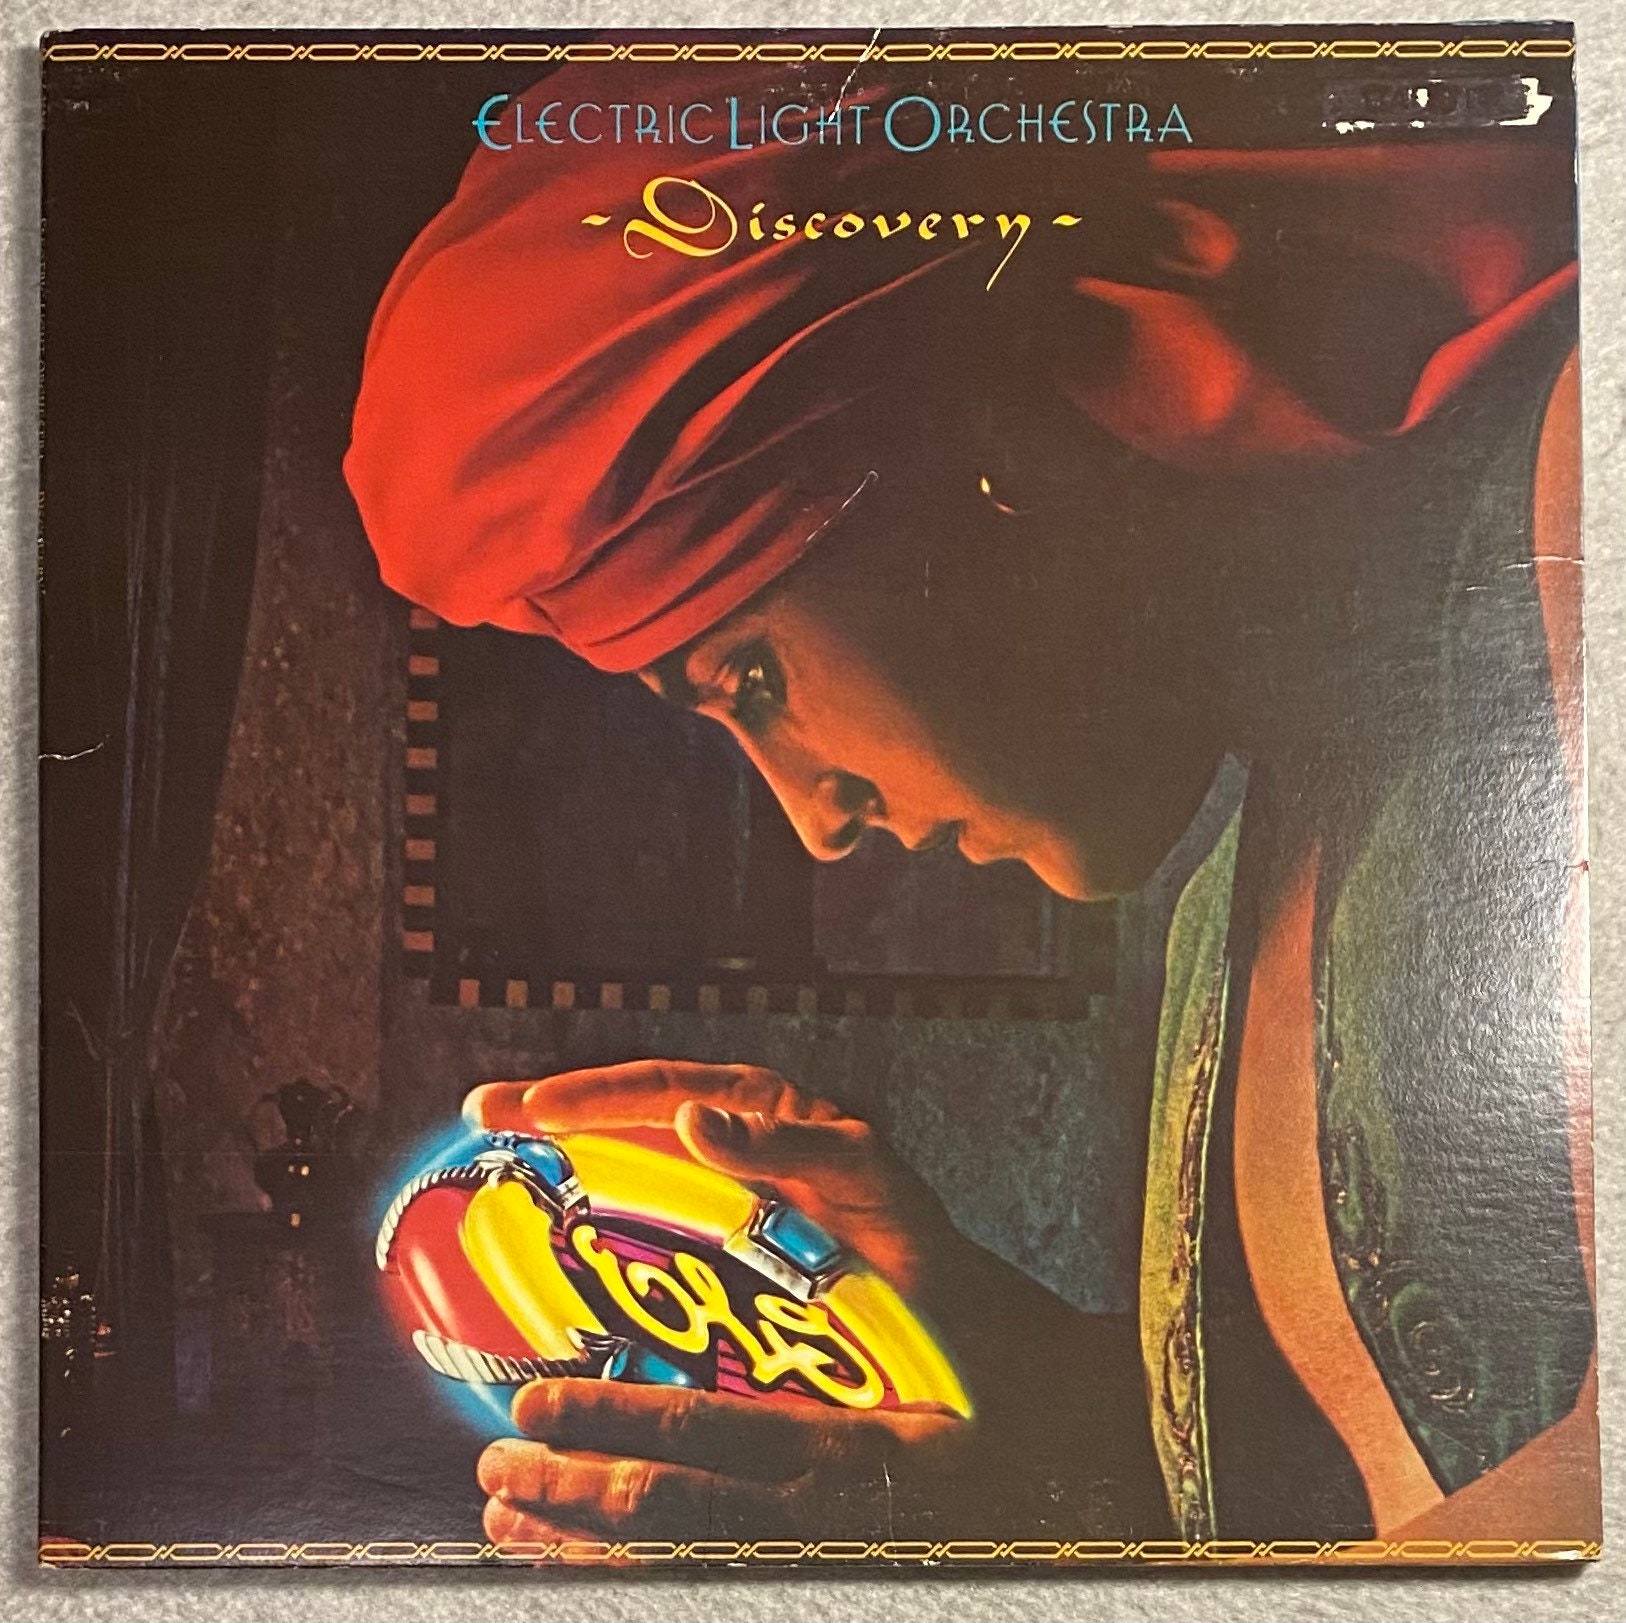 Electric Light Orchestra Livin' Thing/Fire on High 7 EX (Dutch Import)  (Out of Print) (E.L.O.) (ELO)